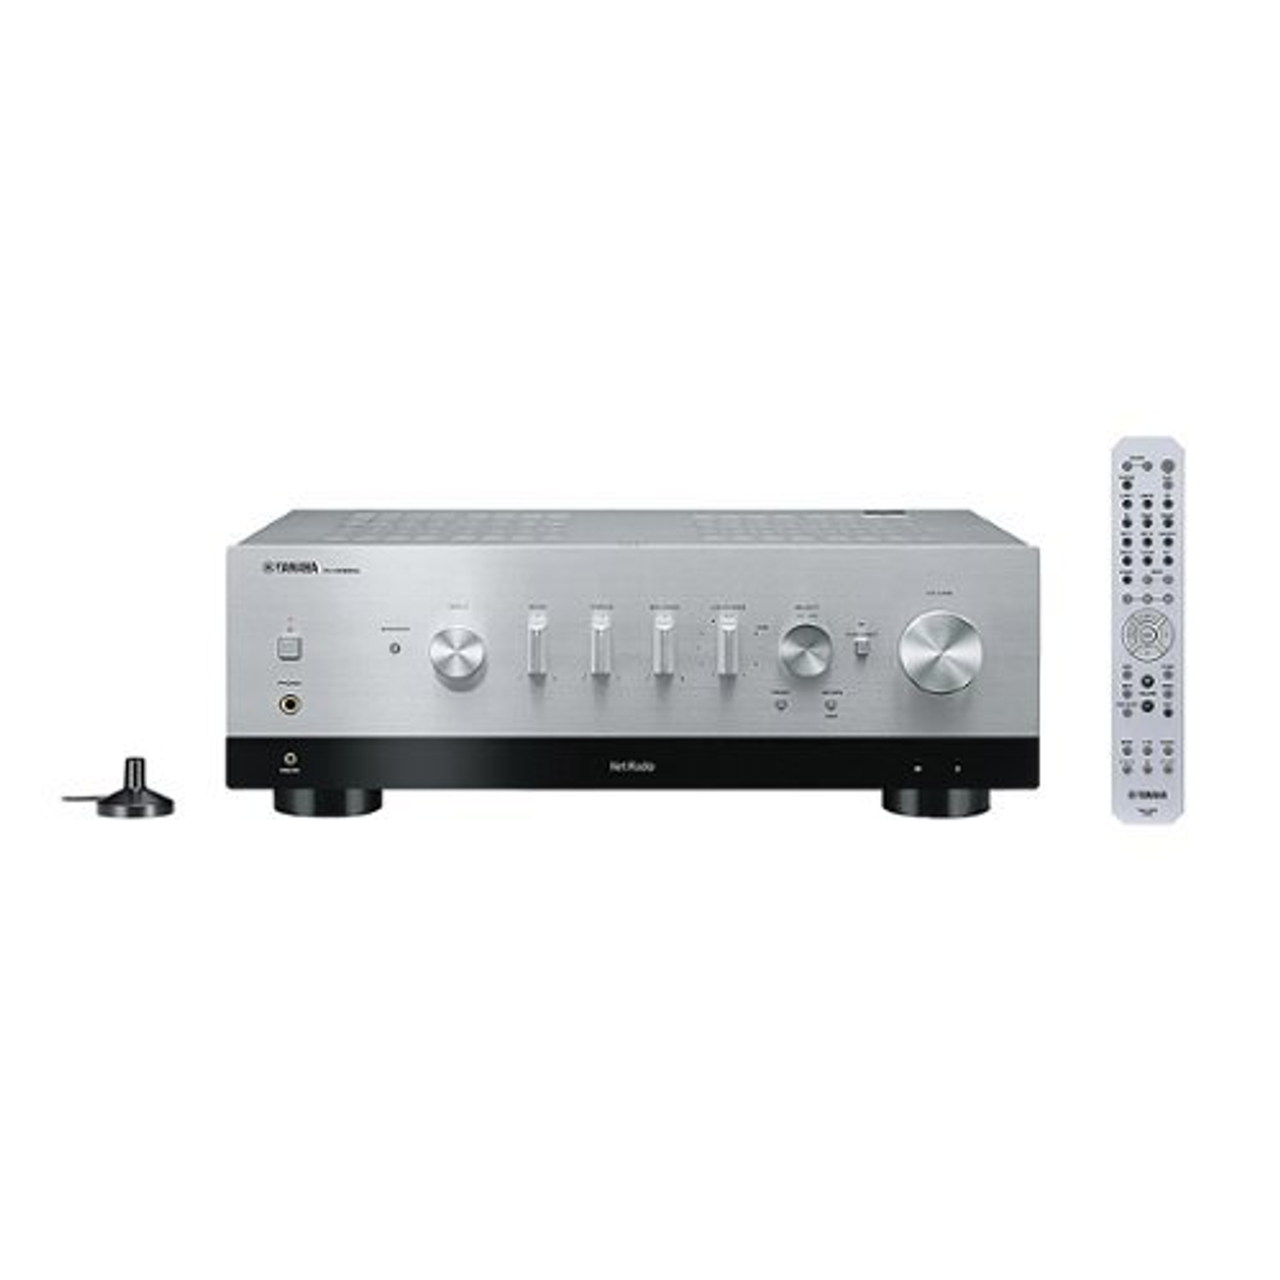 Yamaha - Bluetooth 240-Watt-Continuous-Power 2.0-Channel Network Stereo Receiver with Remote, R-N1000A - Silver